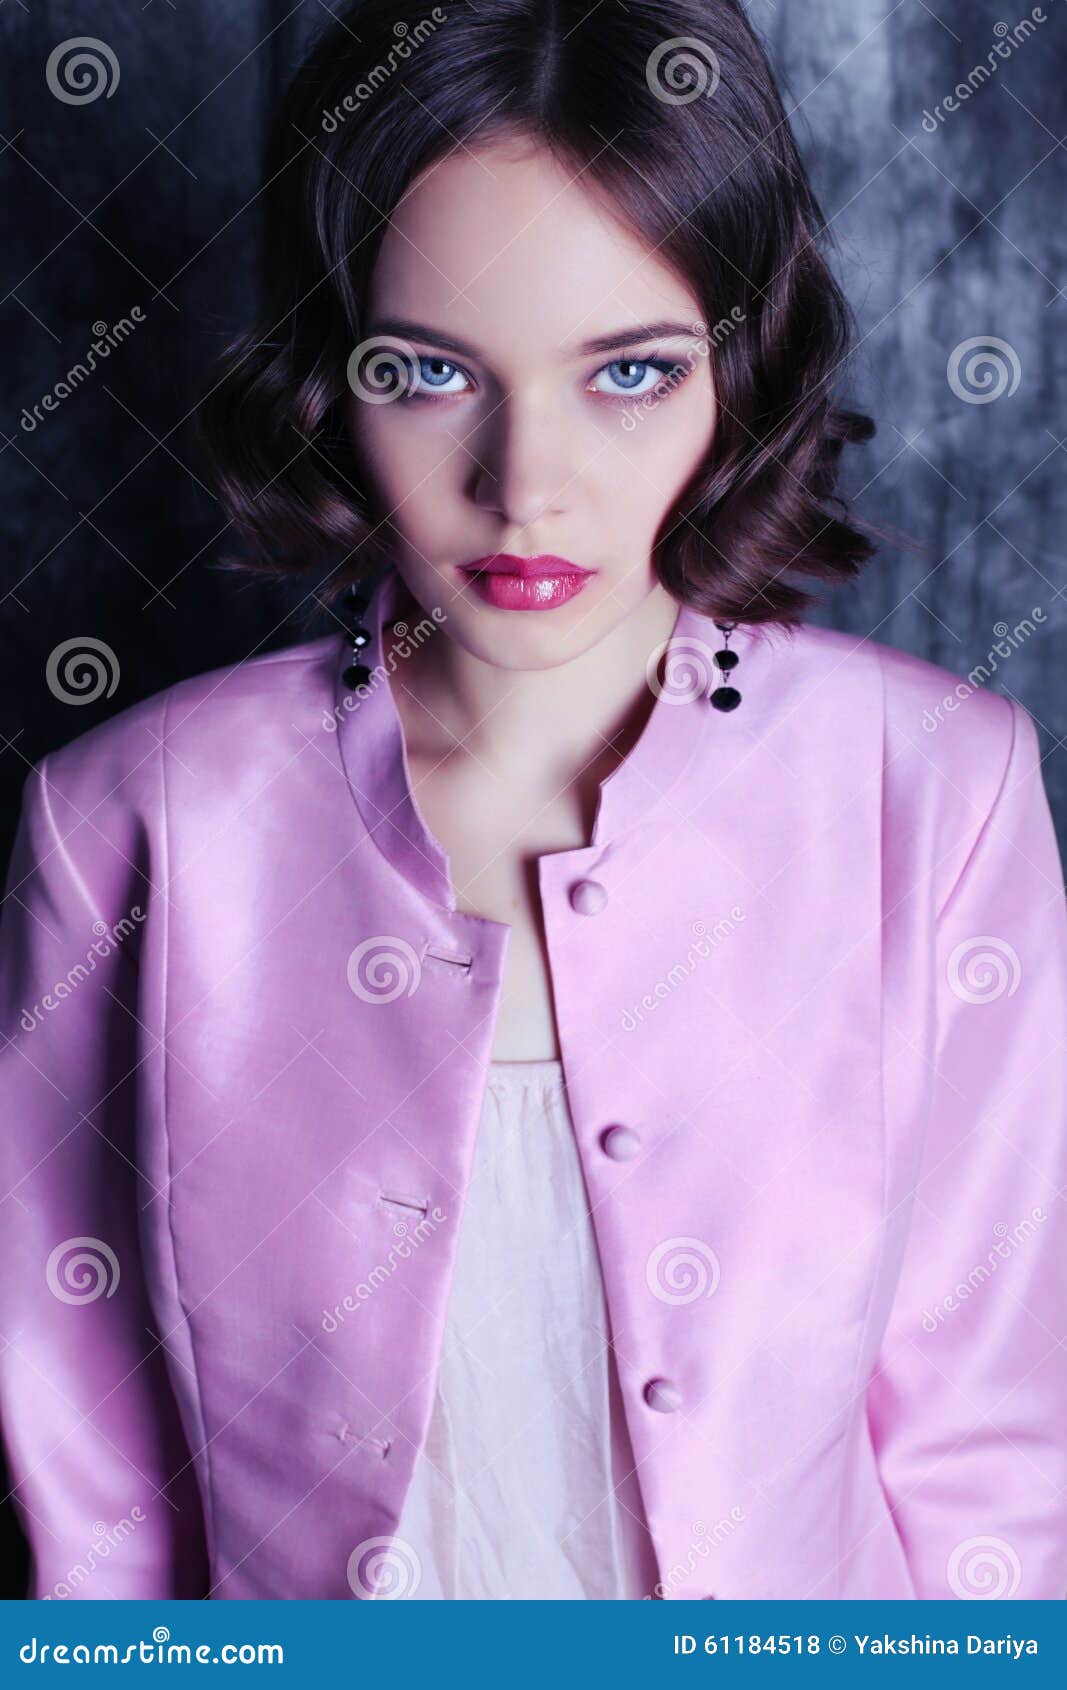 Beautiful Young Girl With Dark Short Hair And Blue Eyes